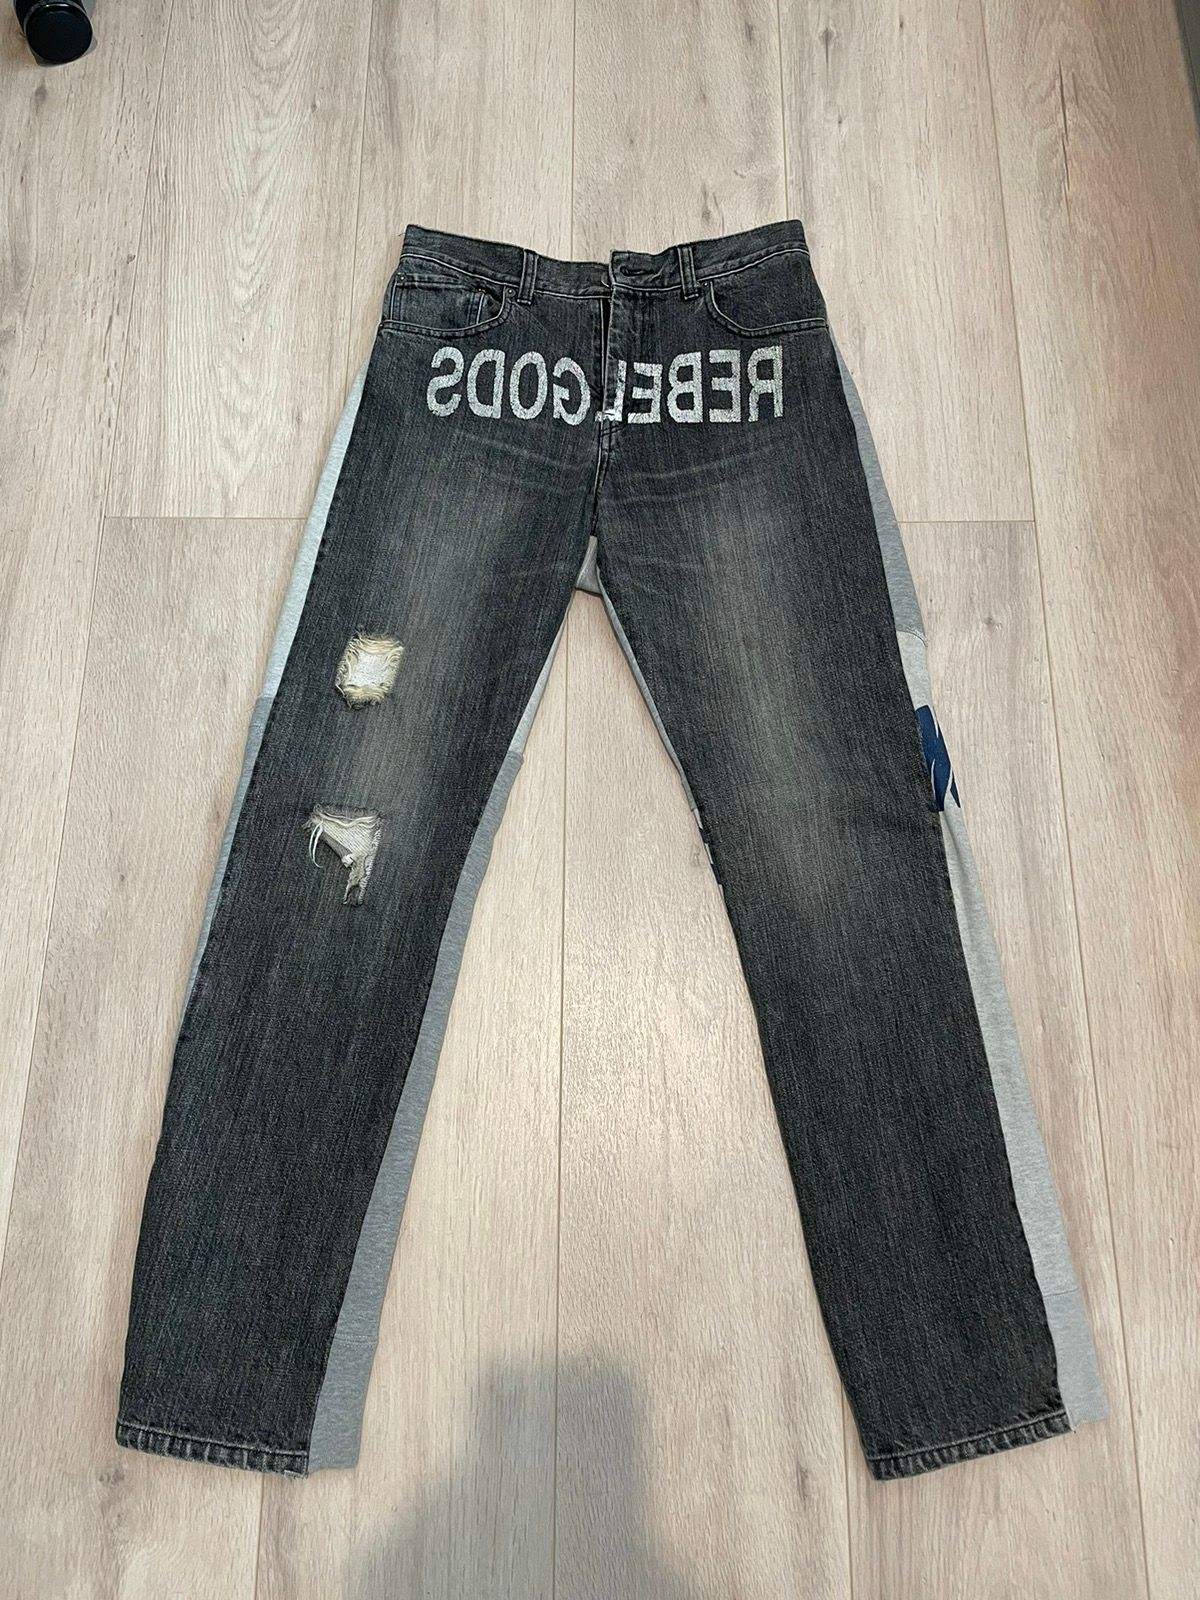 Pre-owned Undercover Rebelgods Hybrid Denim Witches Cell Division Aw02 In Black